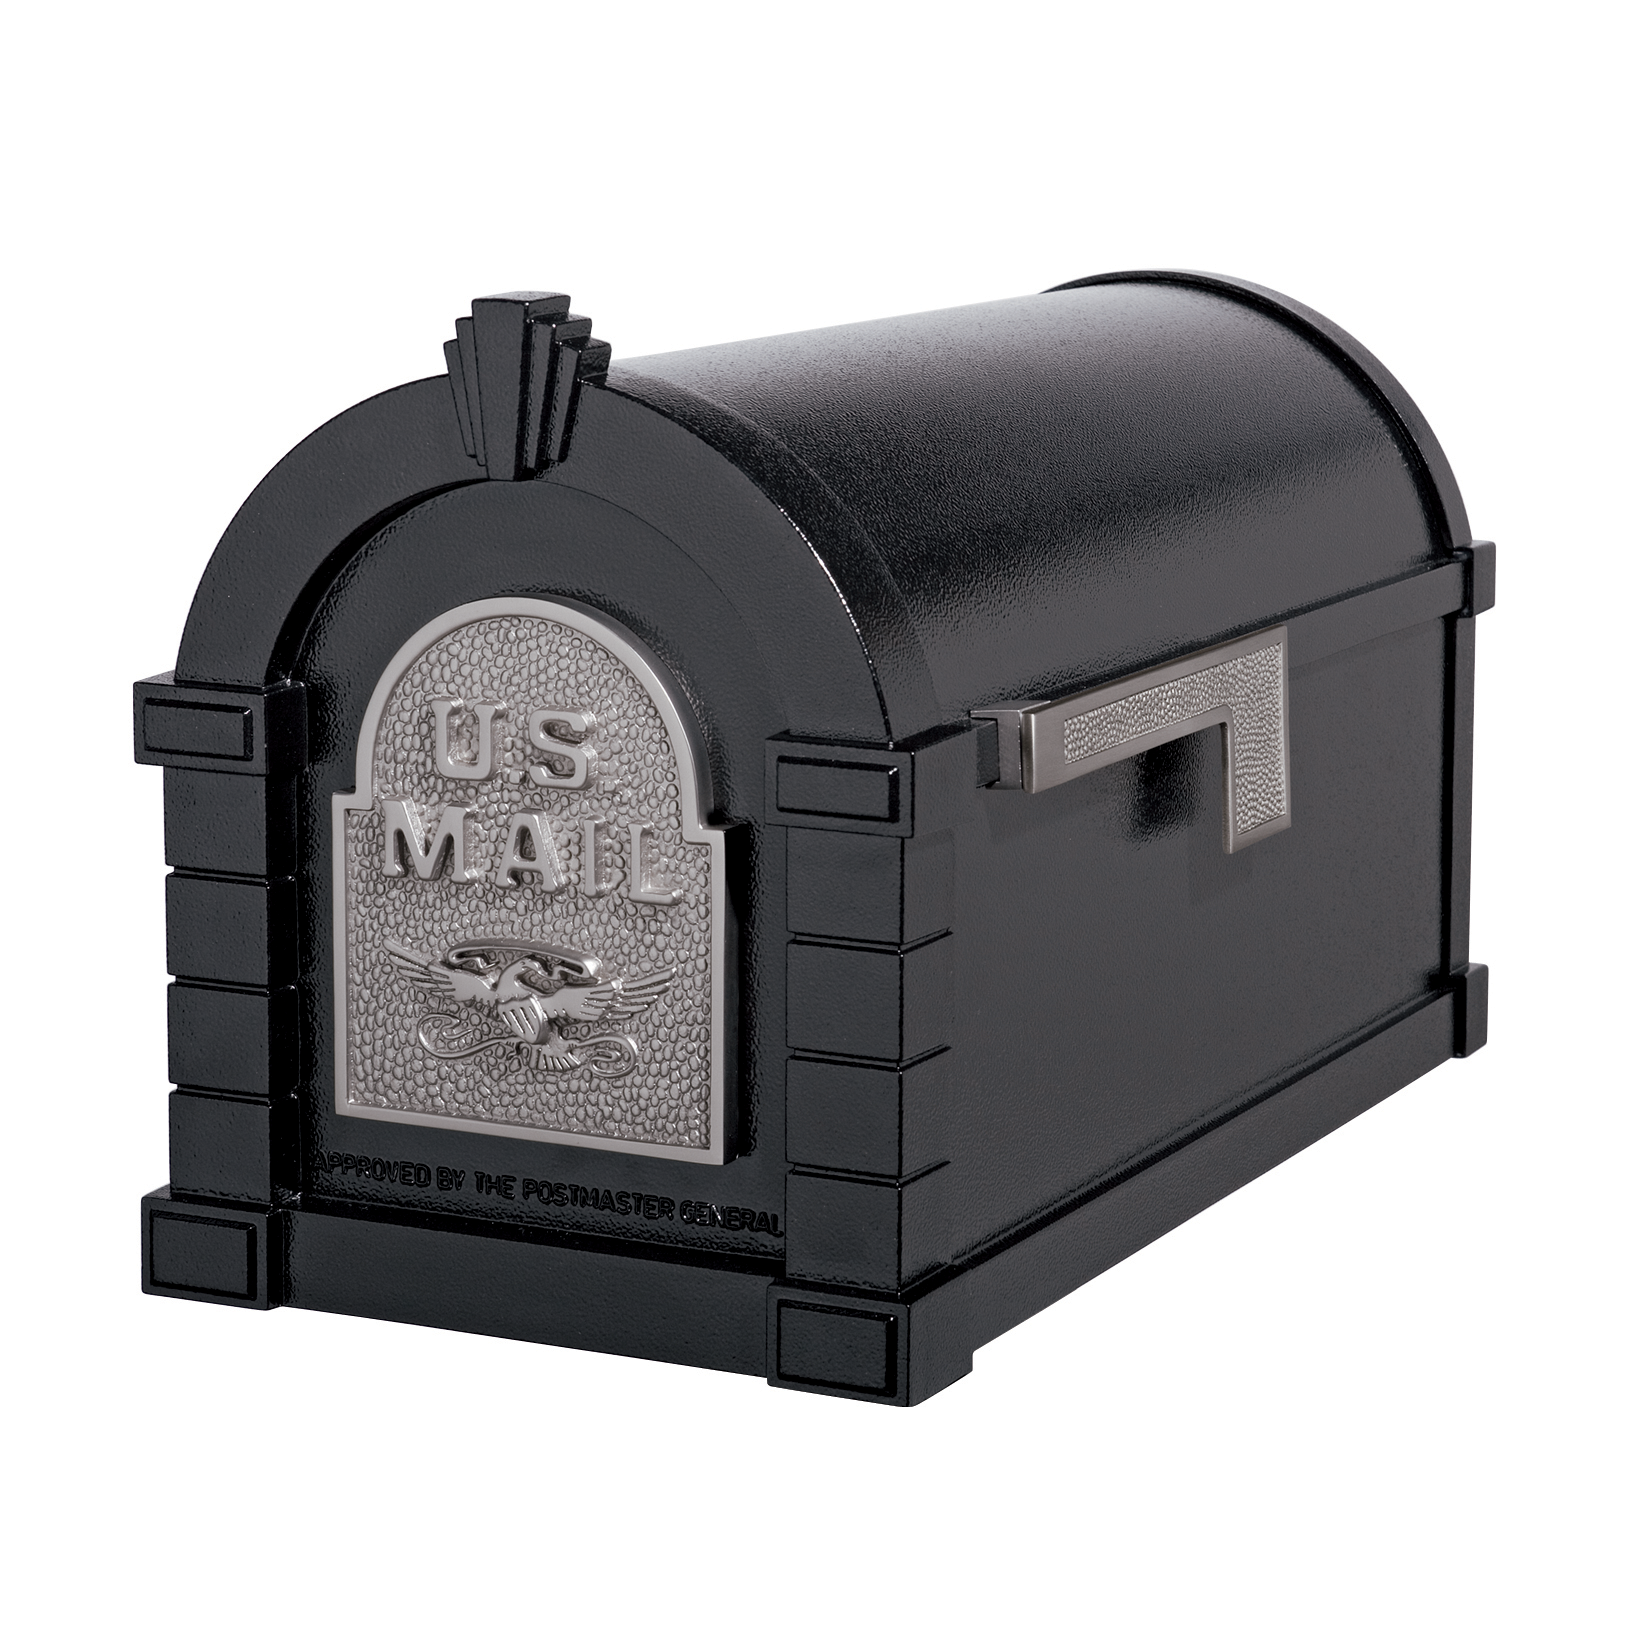 Gaines Eagle Keystone Mailboxes - Black with Satin Nickel